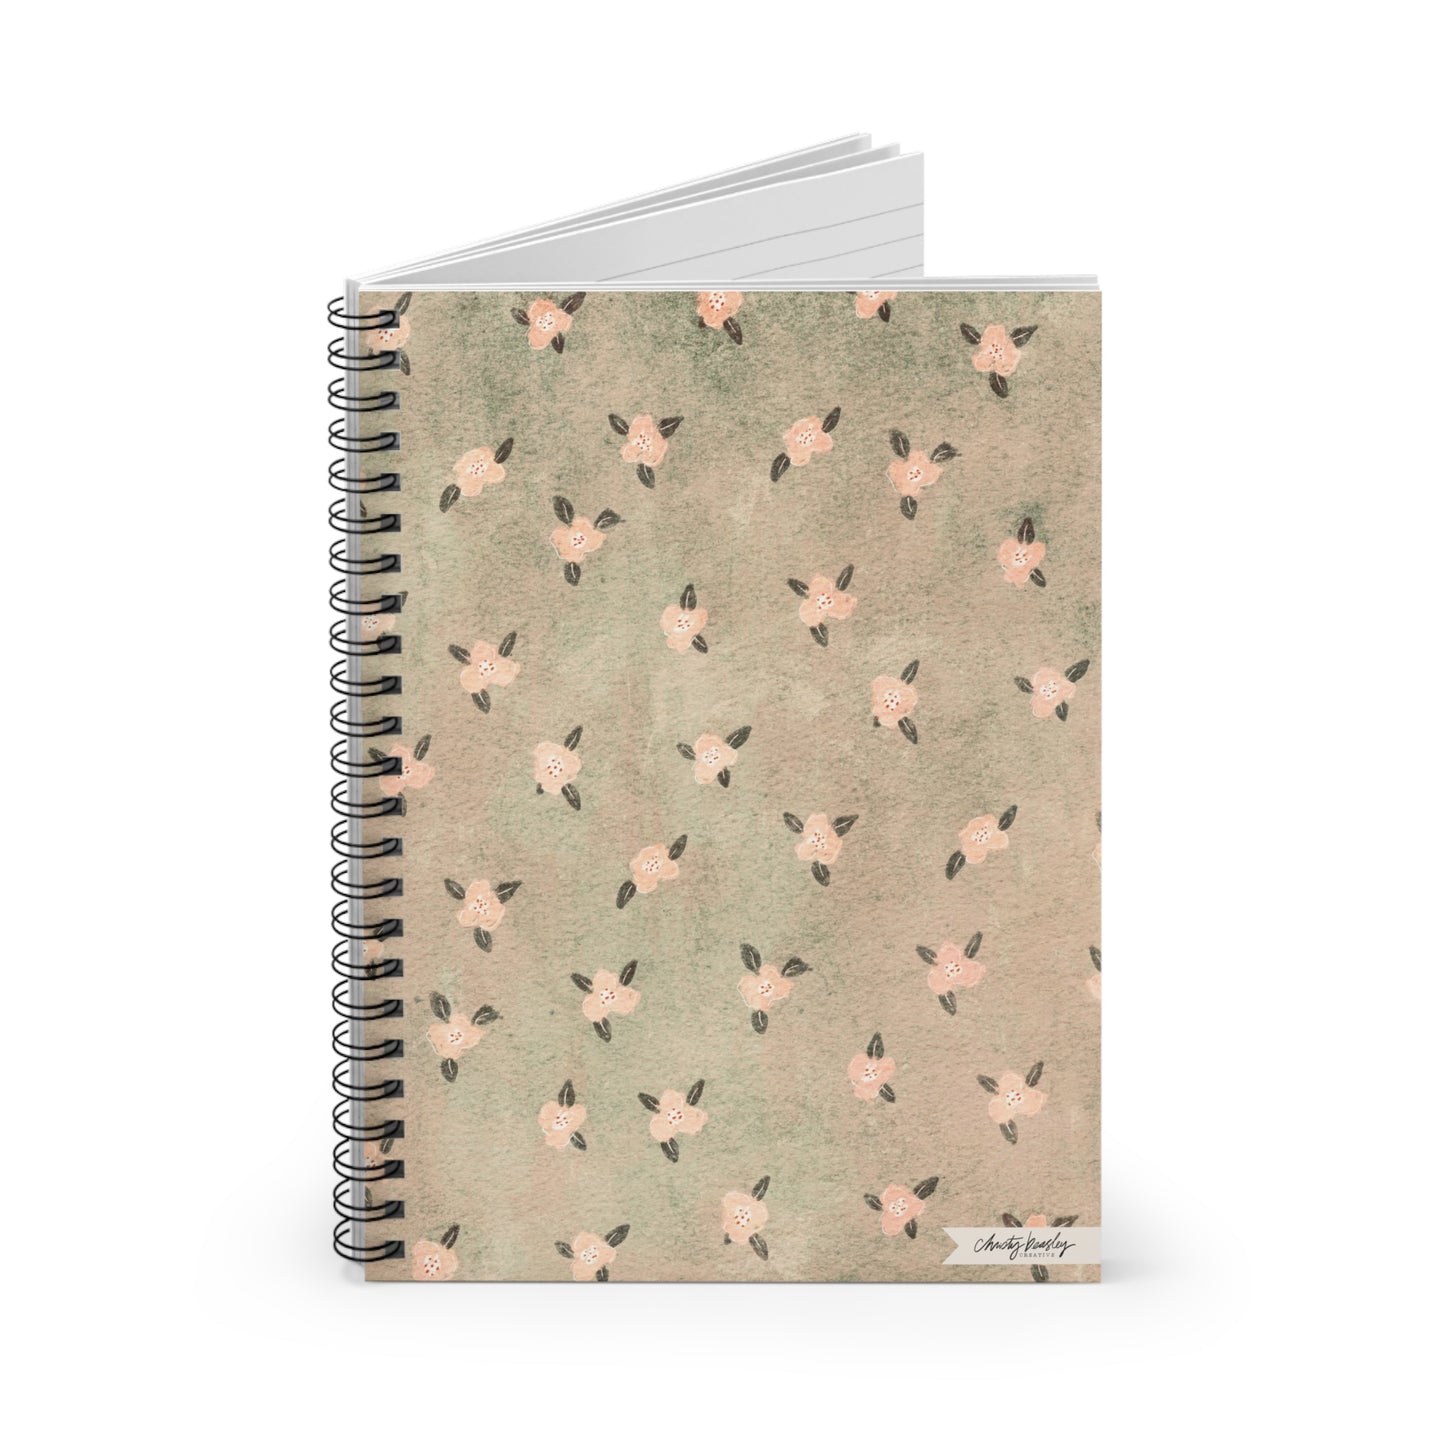 Grungy Pink Floral Spiral Notebook - Ruled Line - by Christy Beasley